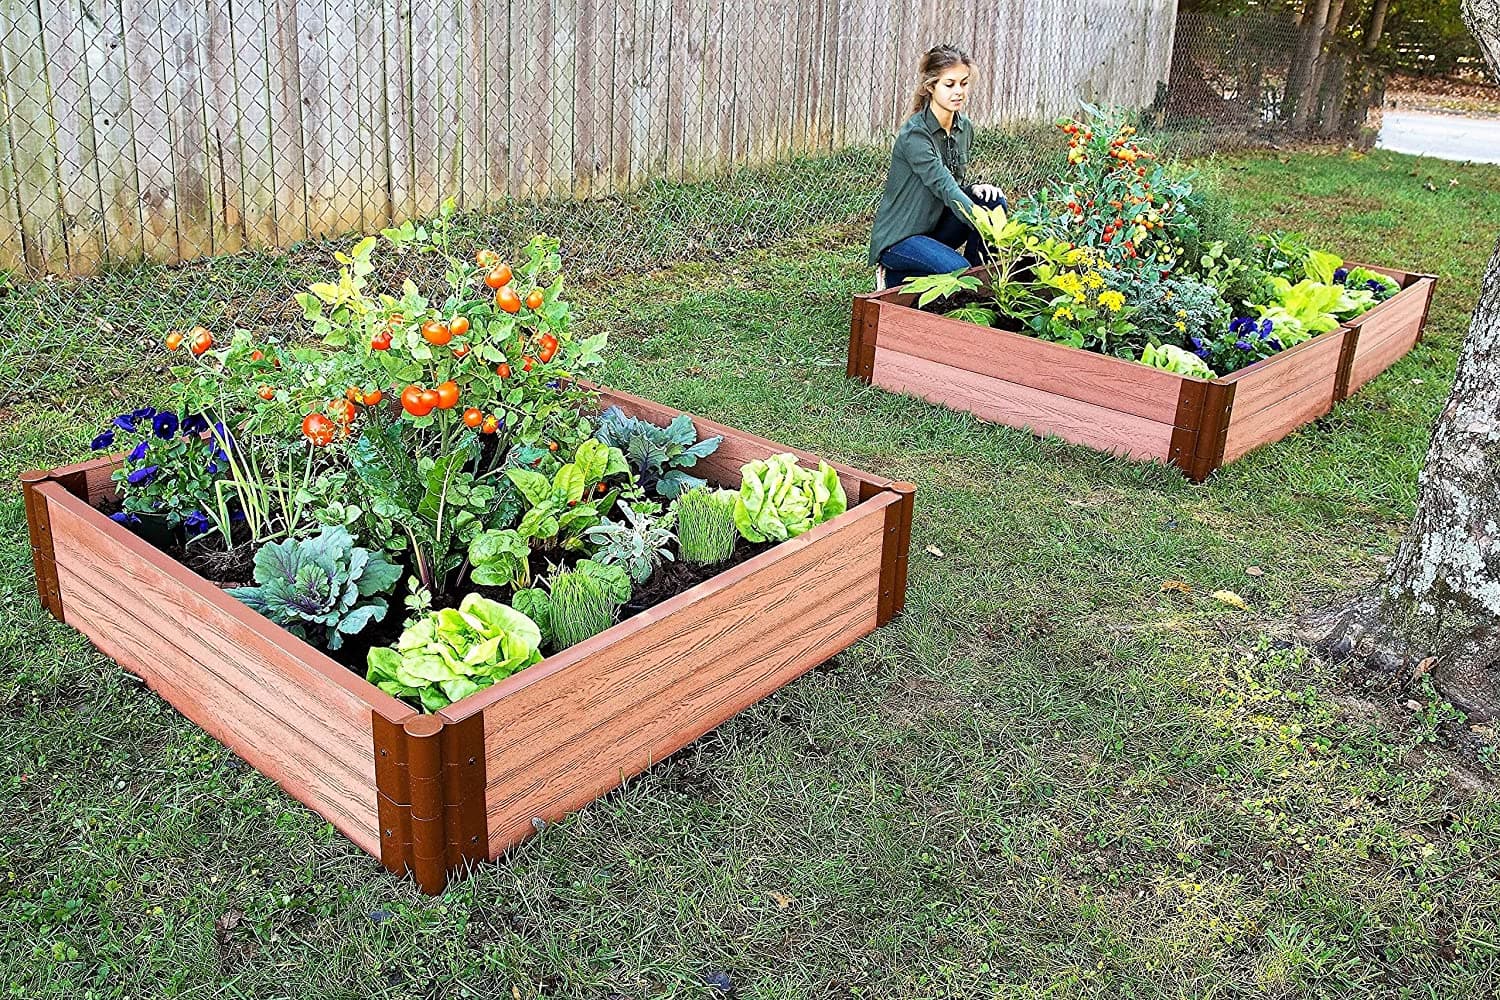 Frame It All Classic Sienna Raised Garden Bed 4' x 8' x 5.5